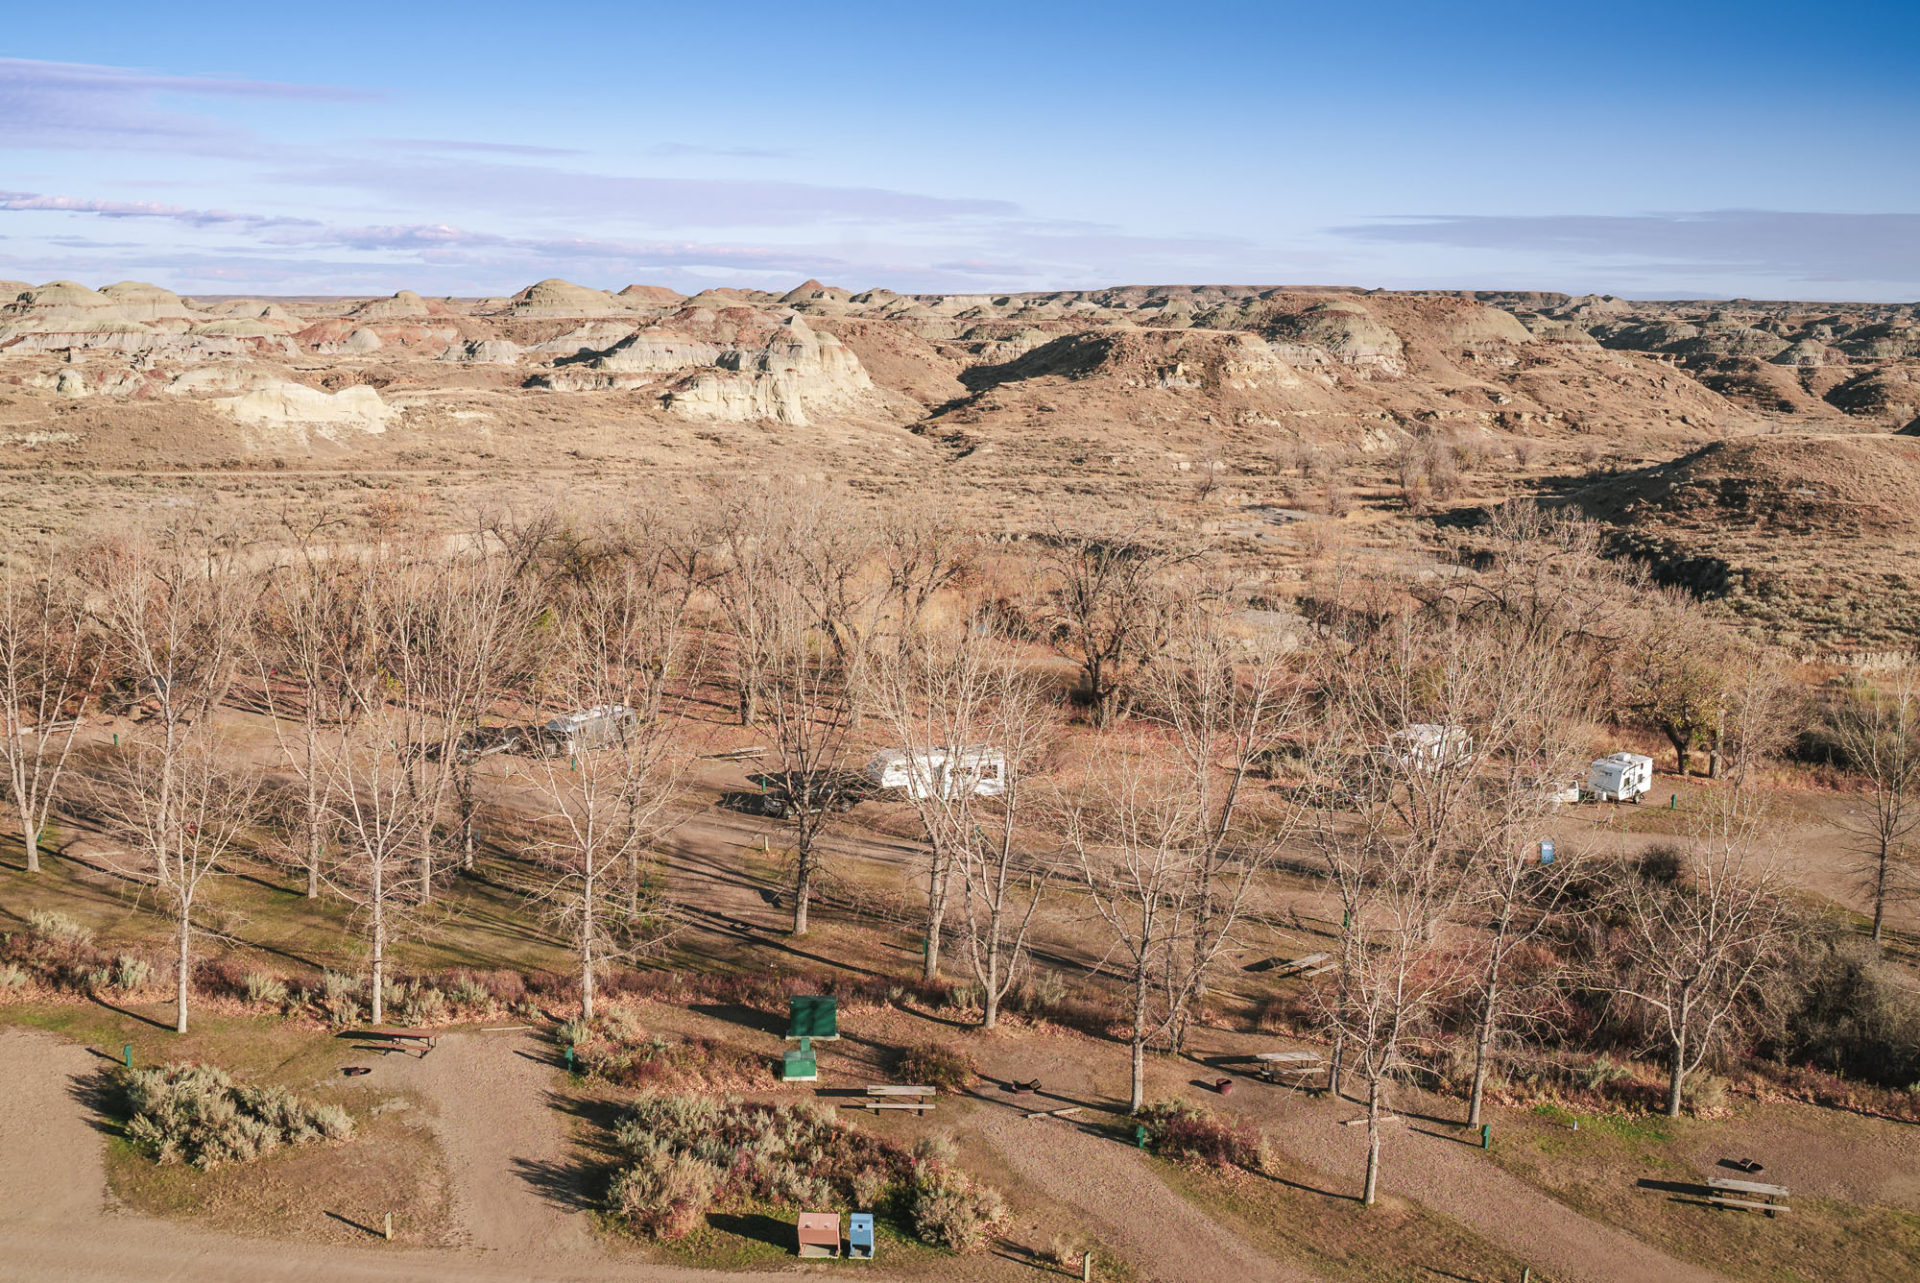 Campground at Dinosaur Provincial Park from one of the trails